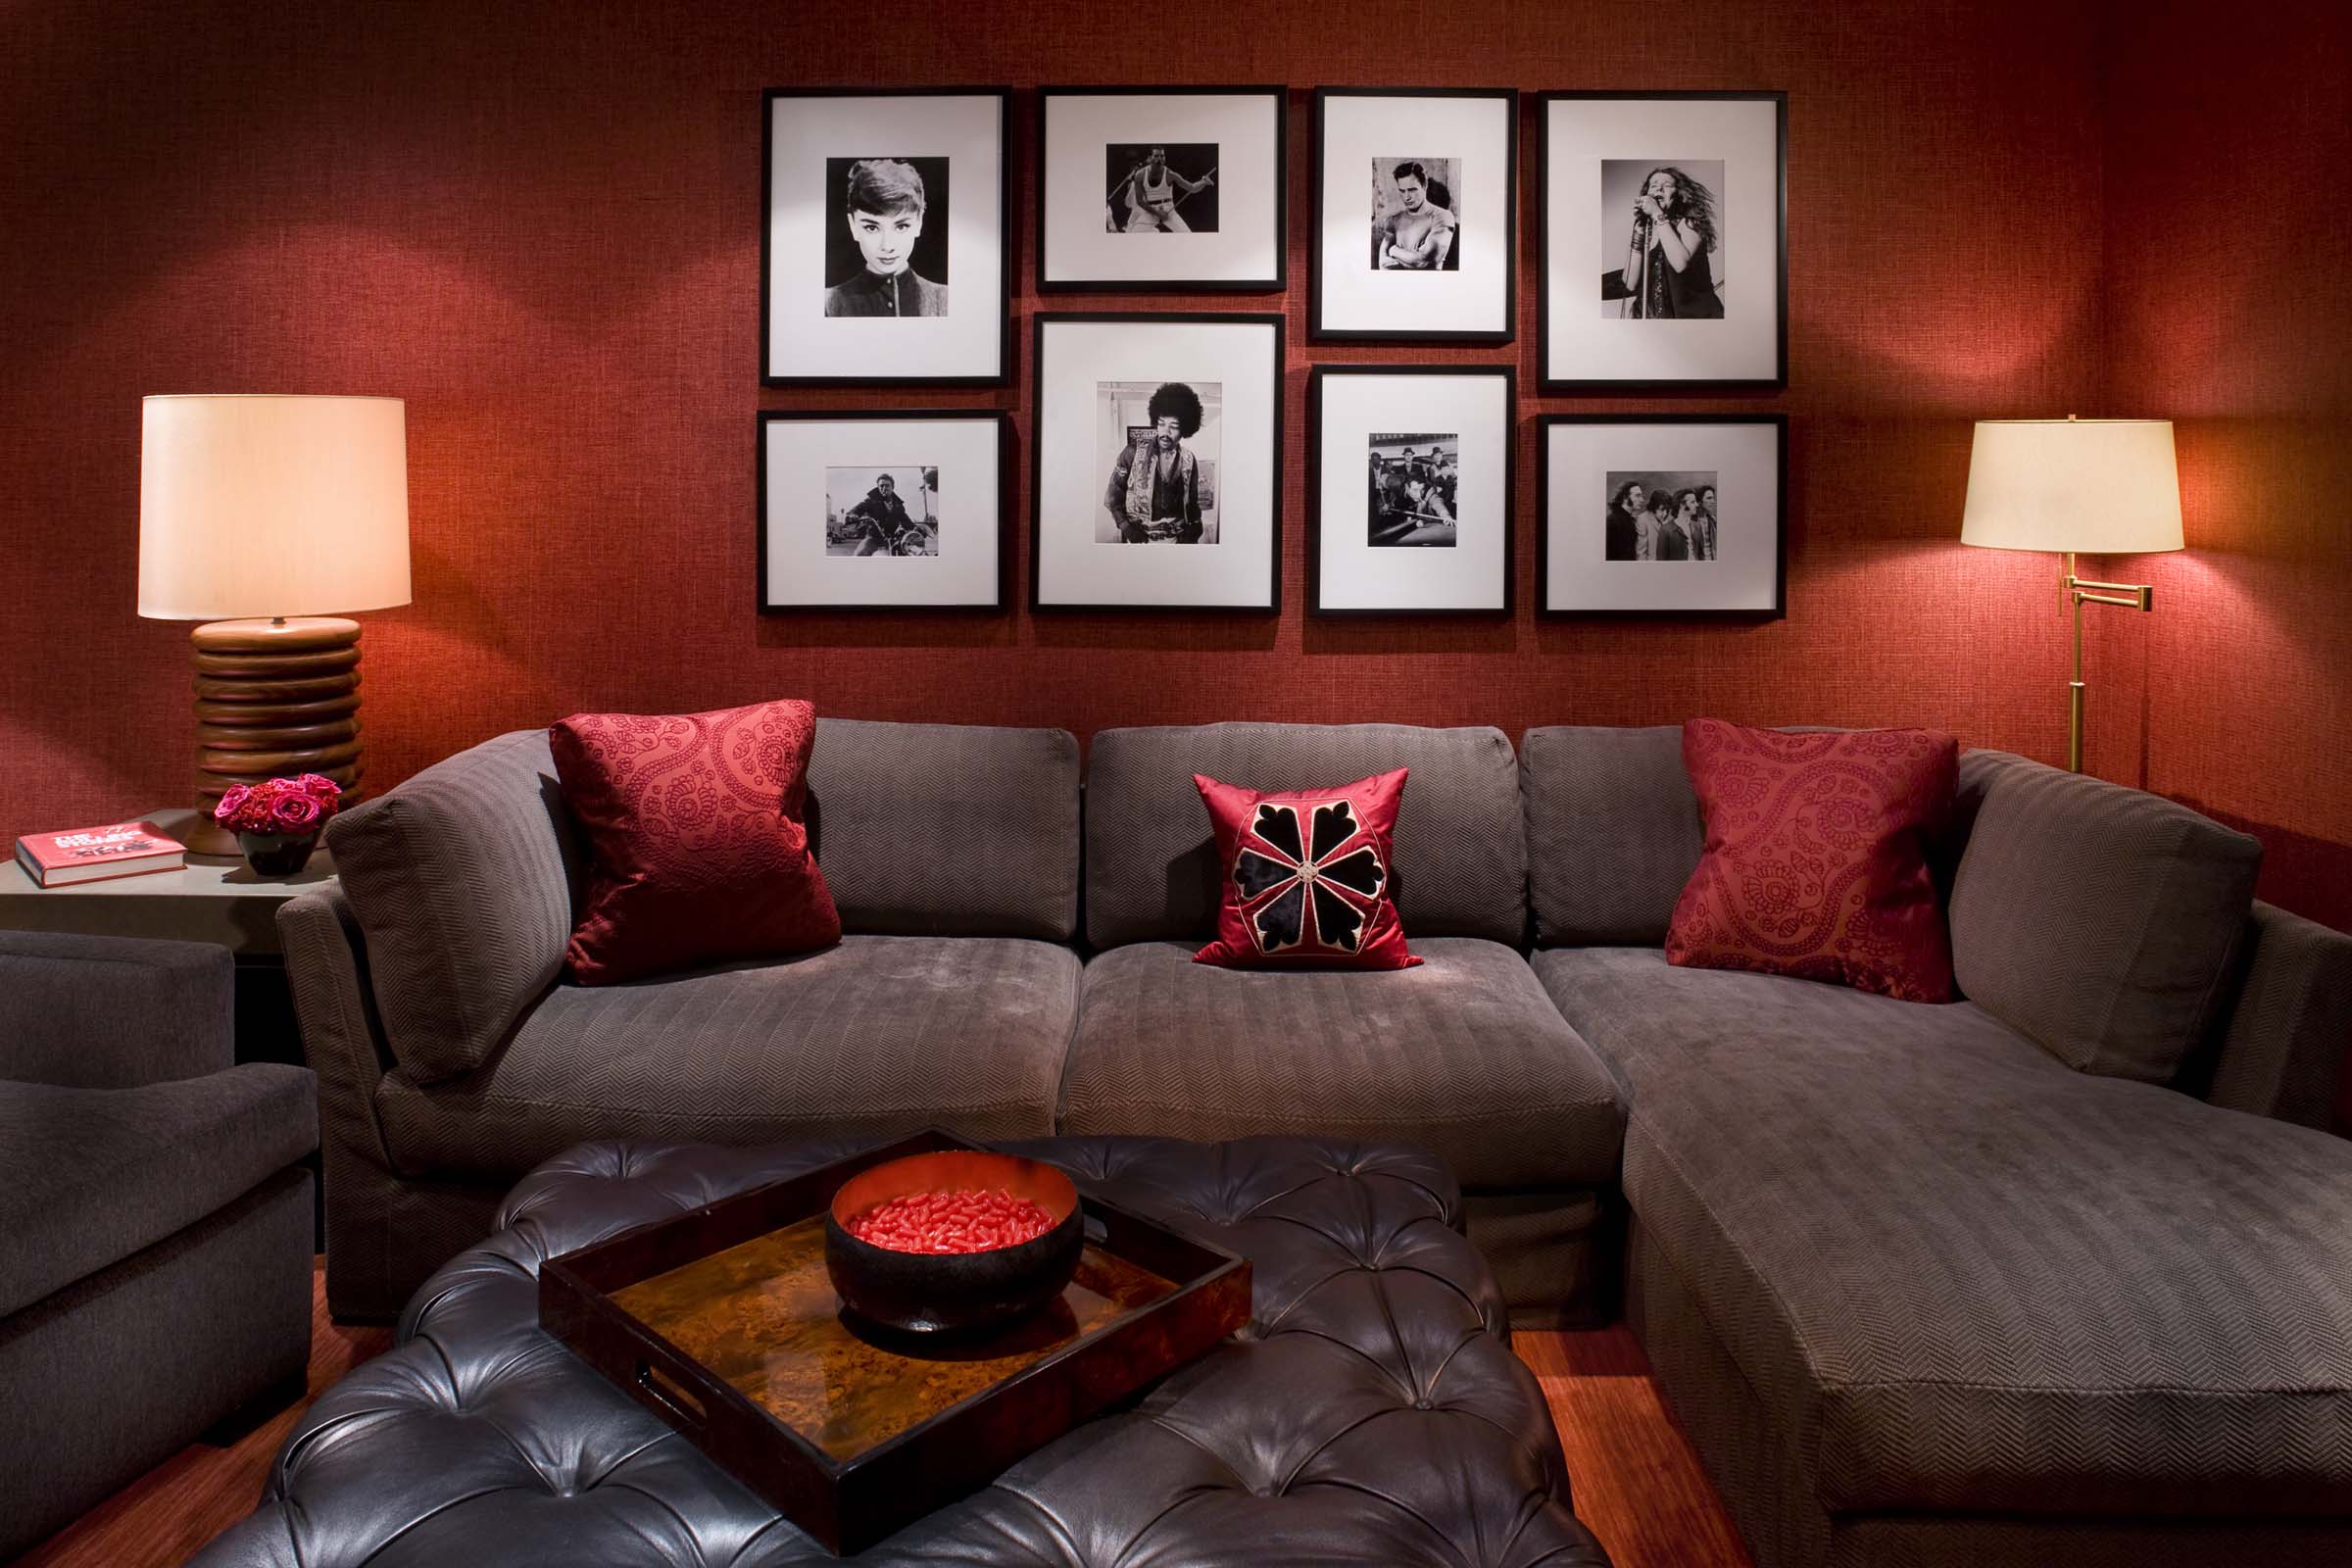 Red Living Ideas Enchanting Red Living Room Color Ideas With Wall Frame Decorations Completed With Gray Sectional Sofa And Soft Tufted Table Plus Furnished With Table Lamp On Nightstand Living Room Find The Best Living Room Color Ideas